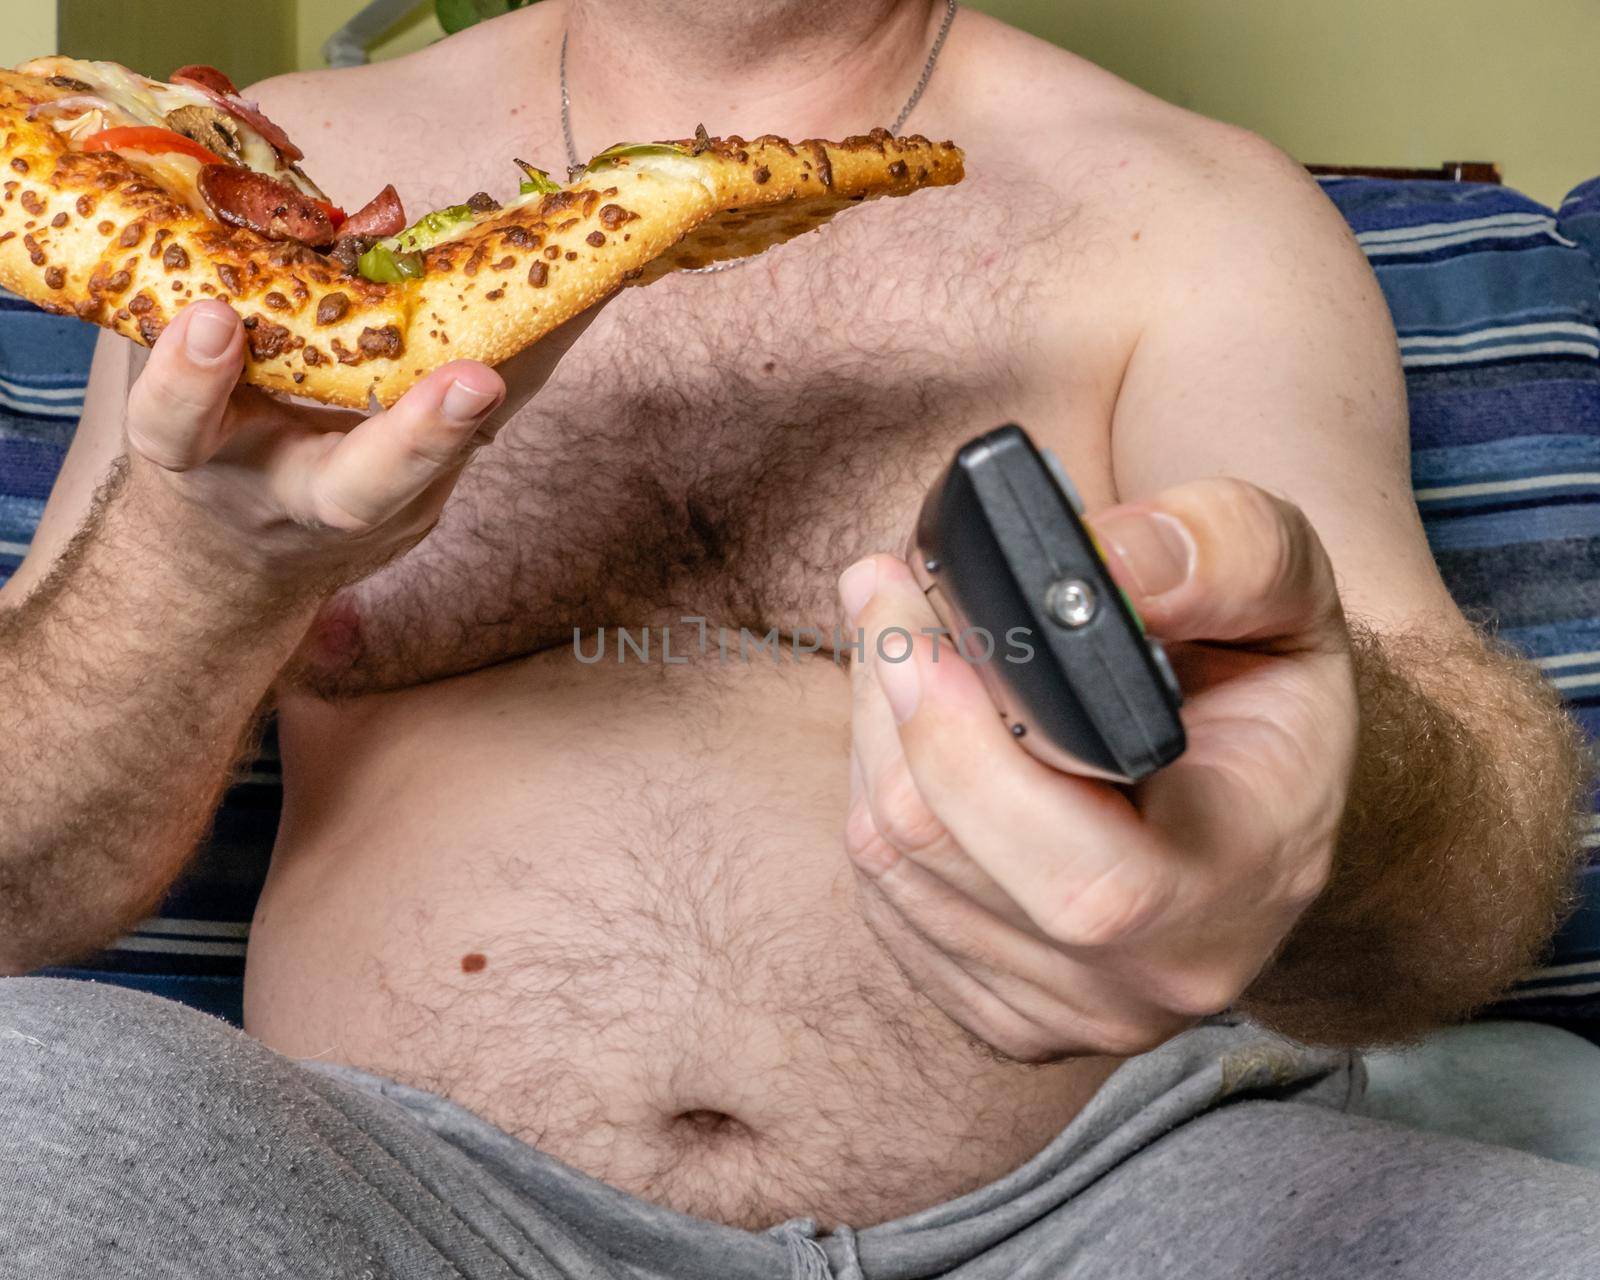 Fat man eating pizza and using TV remote by imagesbykenny